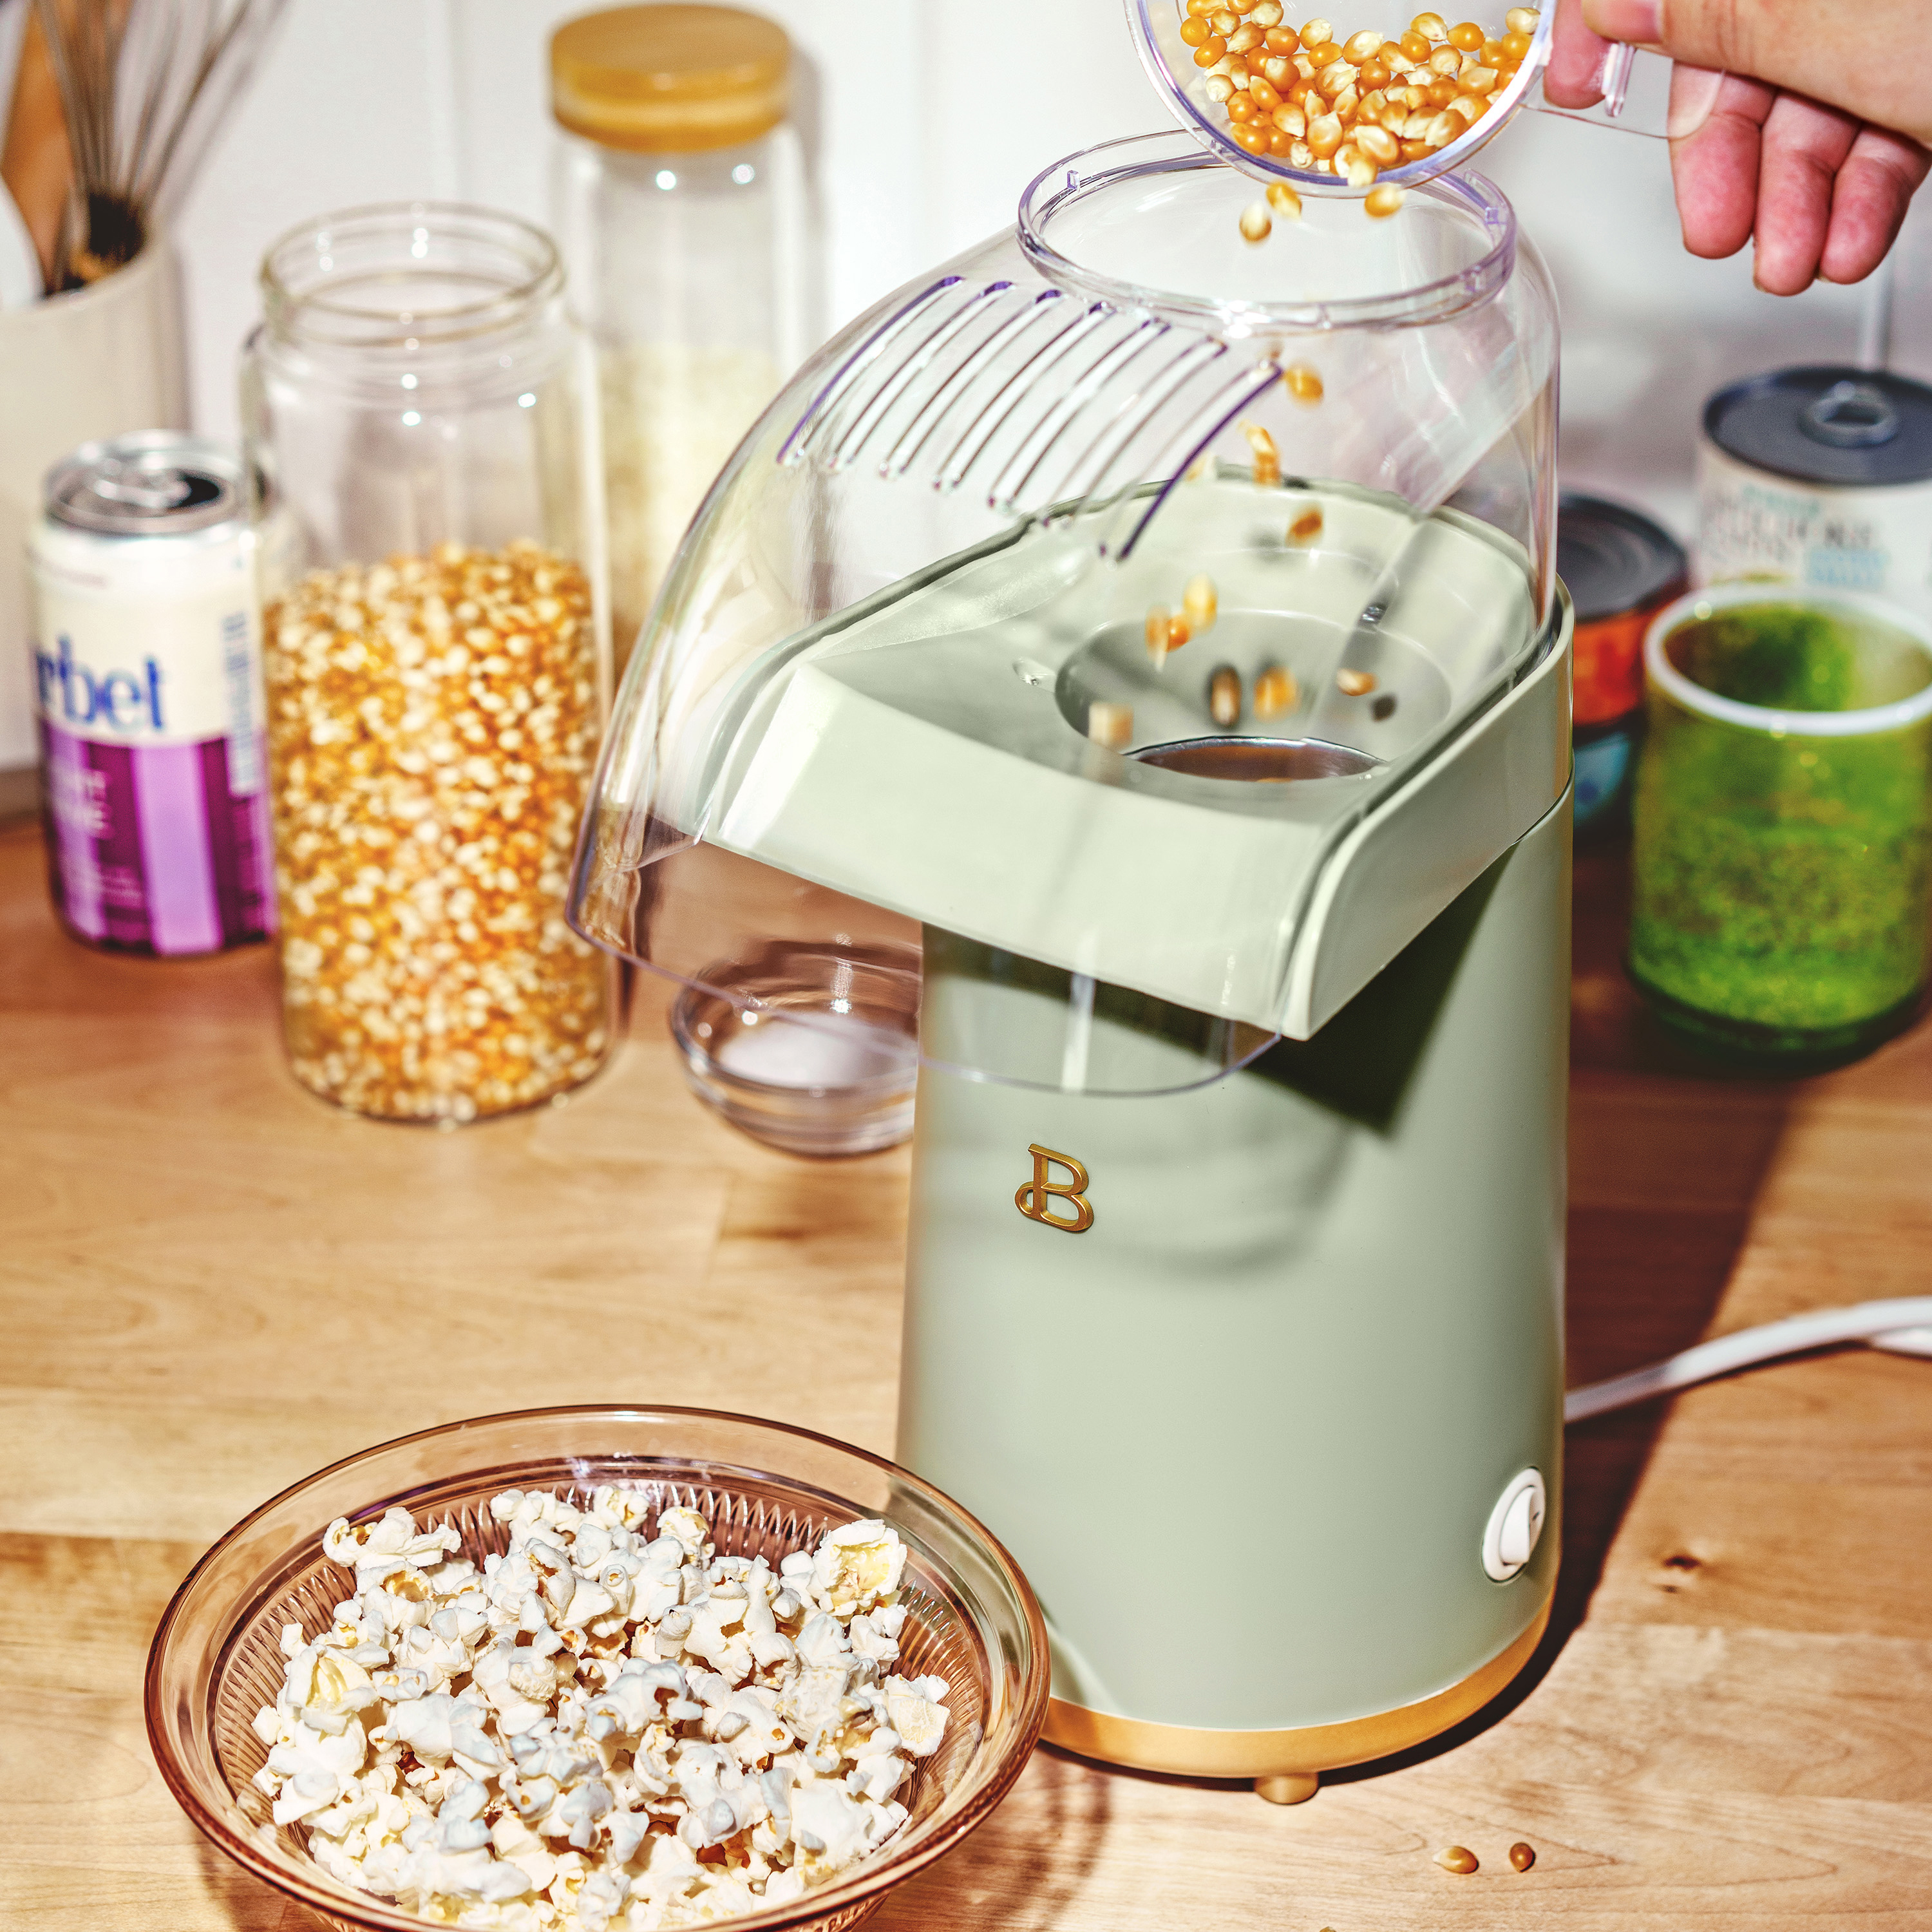 Beautiful 16 Cup Hot Air Electric Popcorn Maker, Sage Green by Drew Barrymore - image 11 of 13